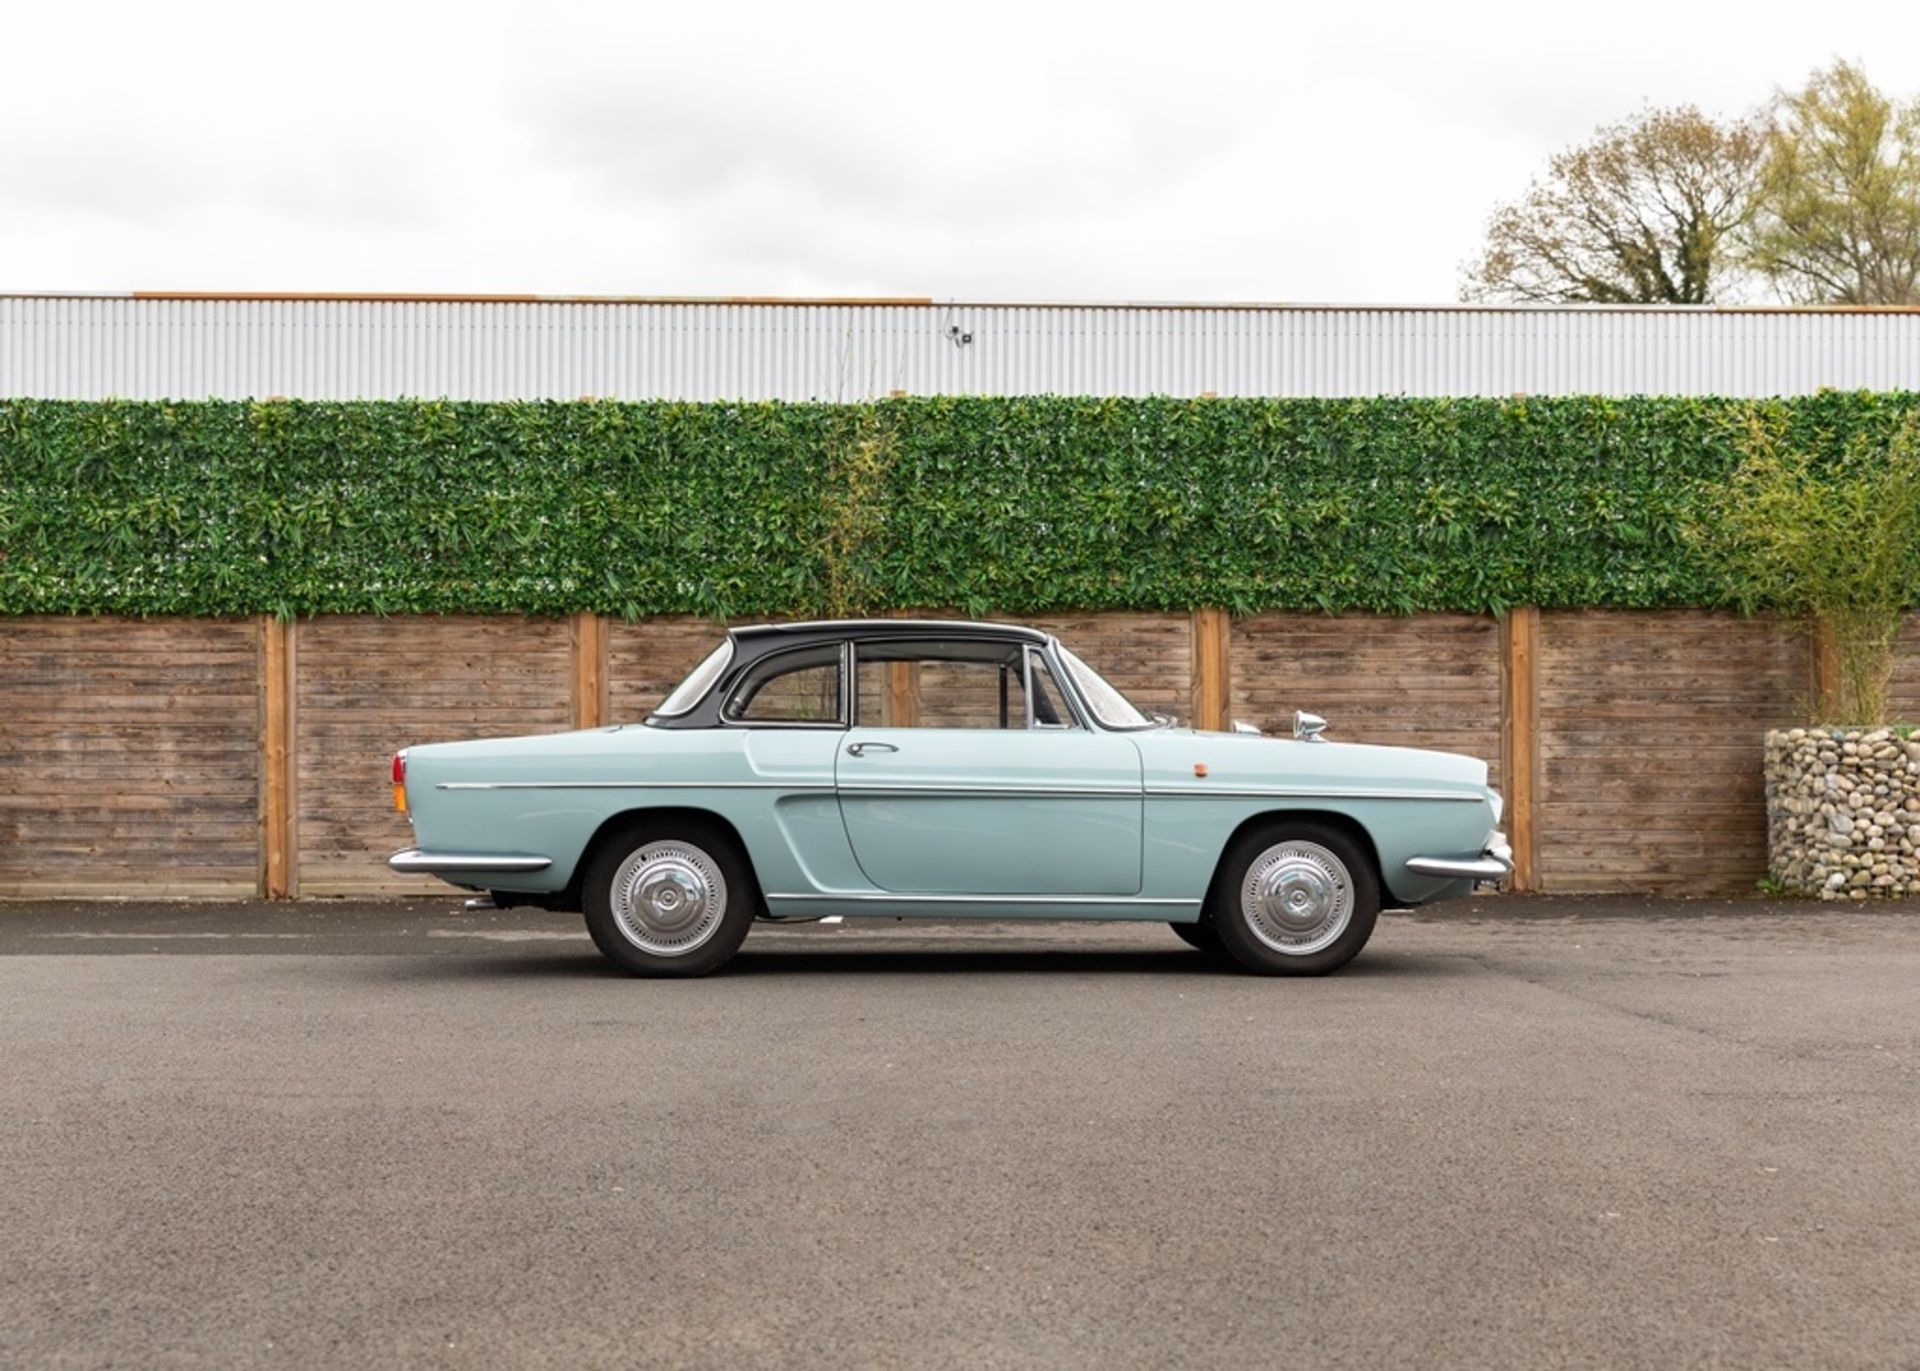 1968 Renault Caravelle Convertible - Image 18 of 20